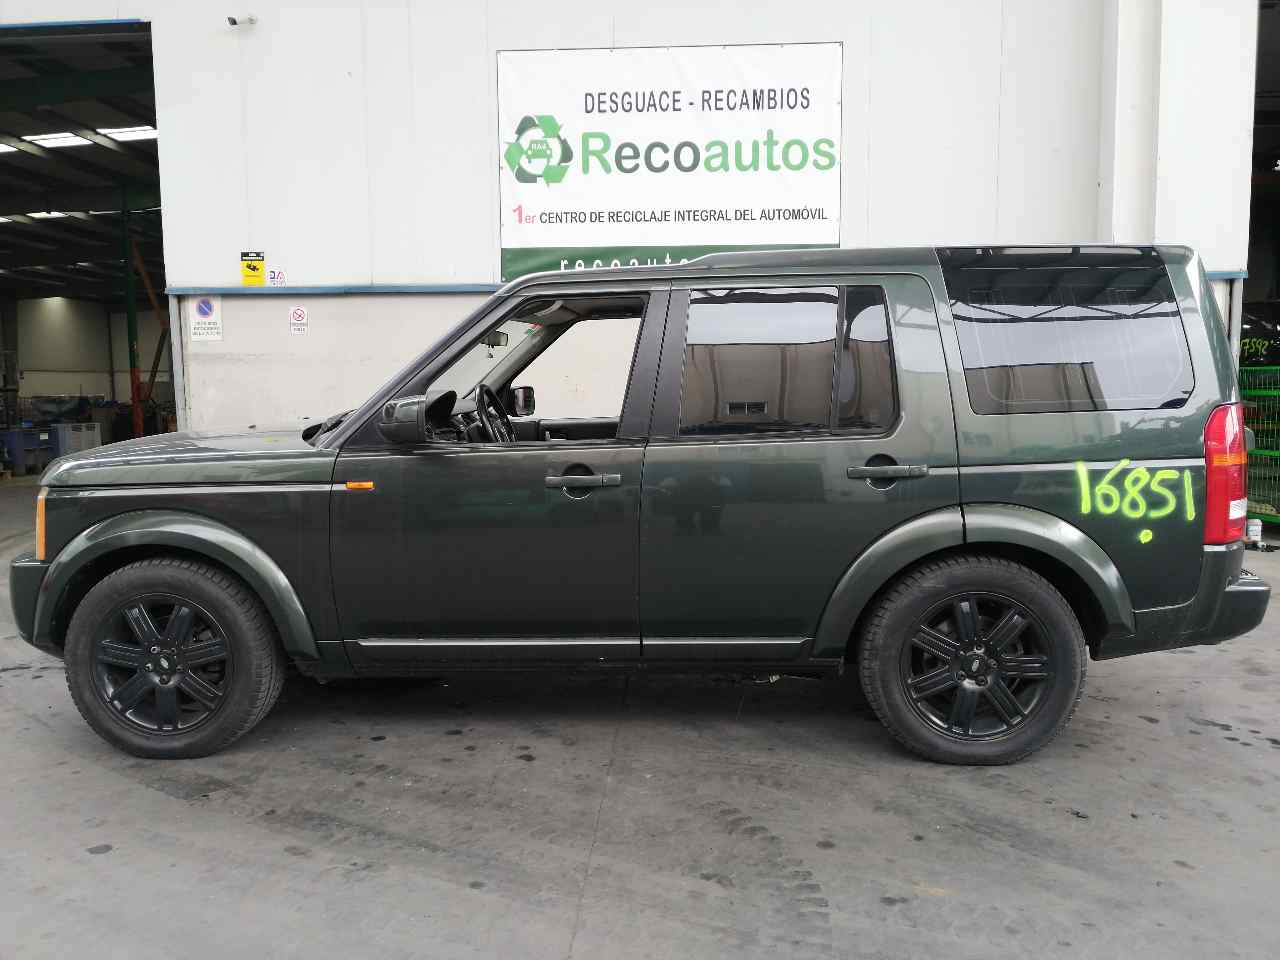 LAND ROVER Discovery 4 generation (2009-2016) Tire R198JX19EH2IS57, ALUMINIO7P, RRC502640XXX 19893002